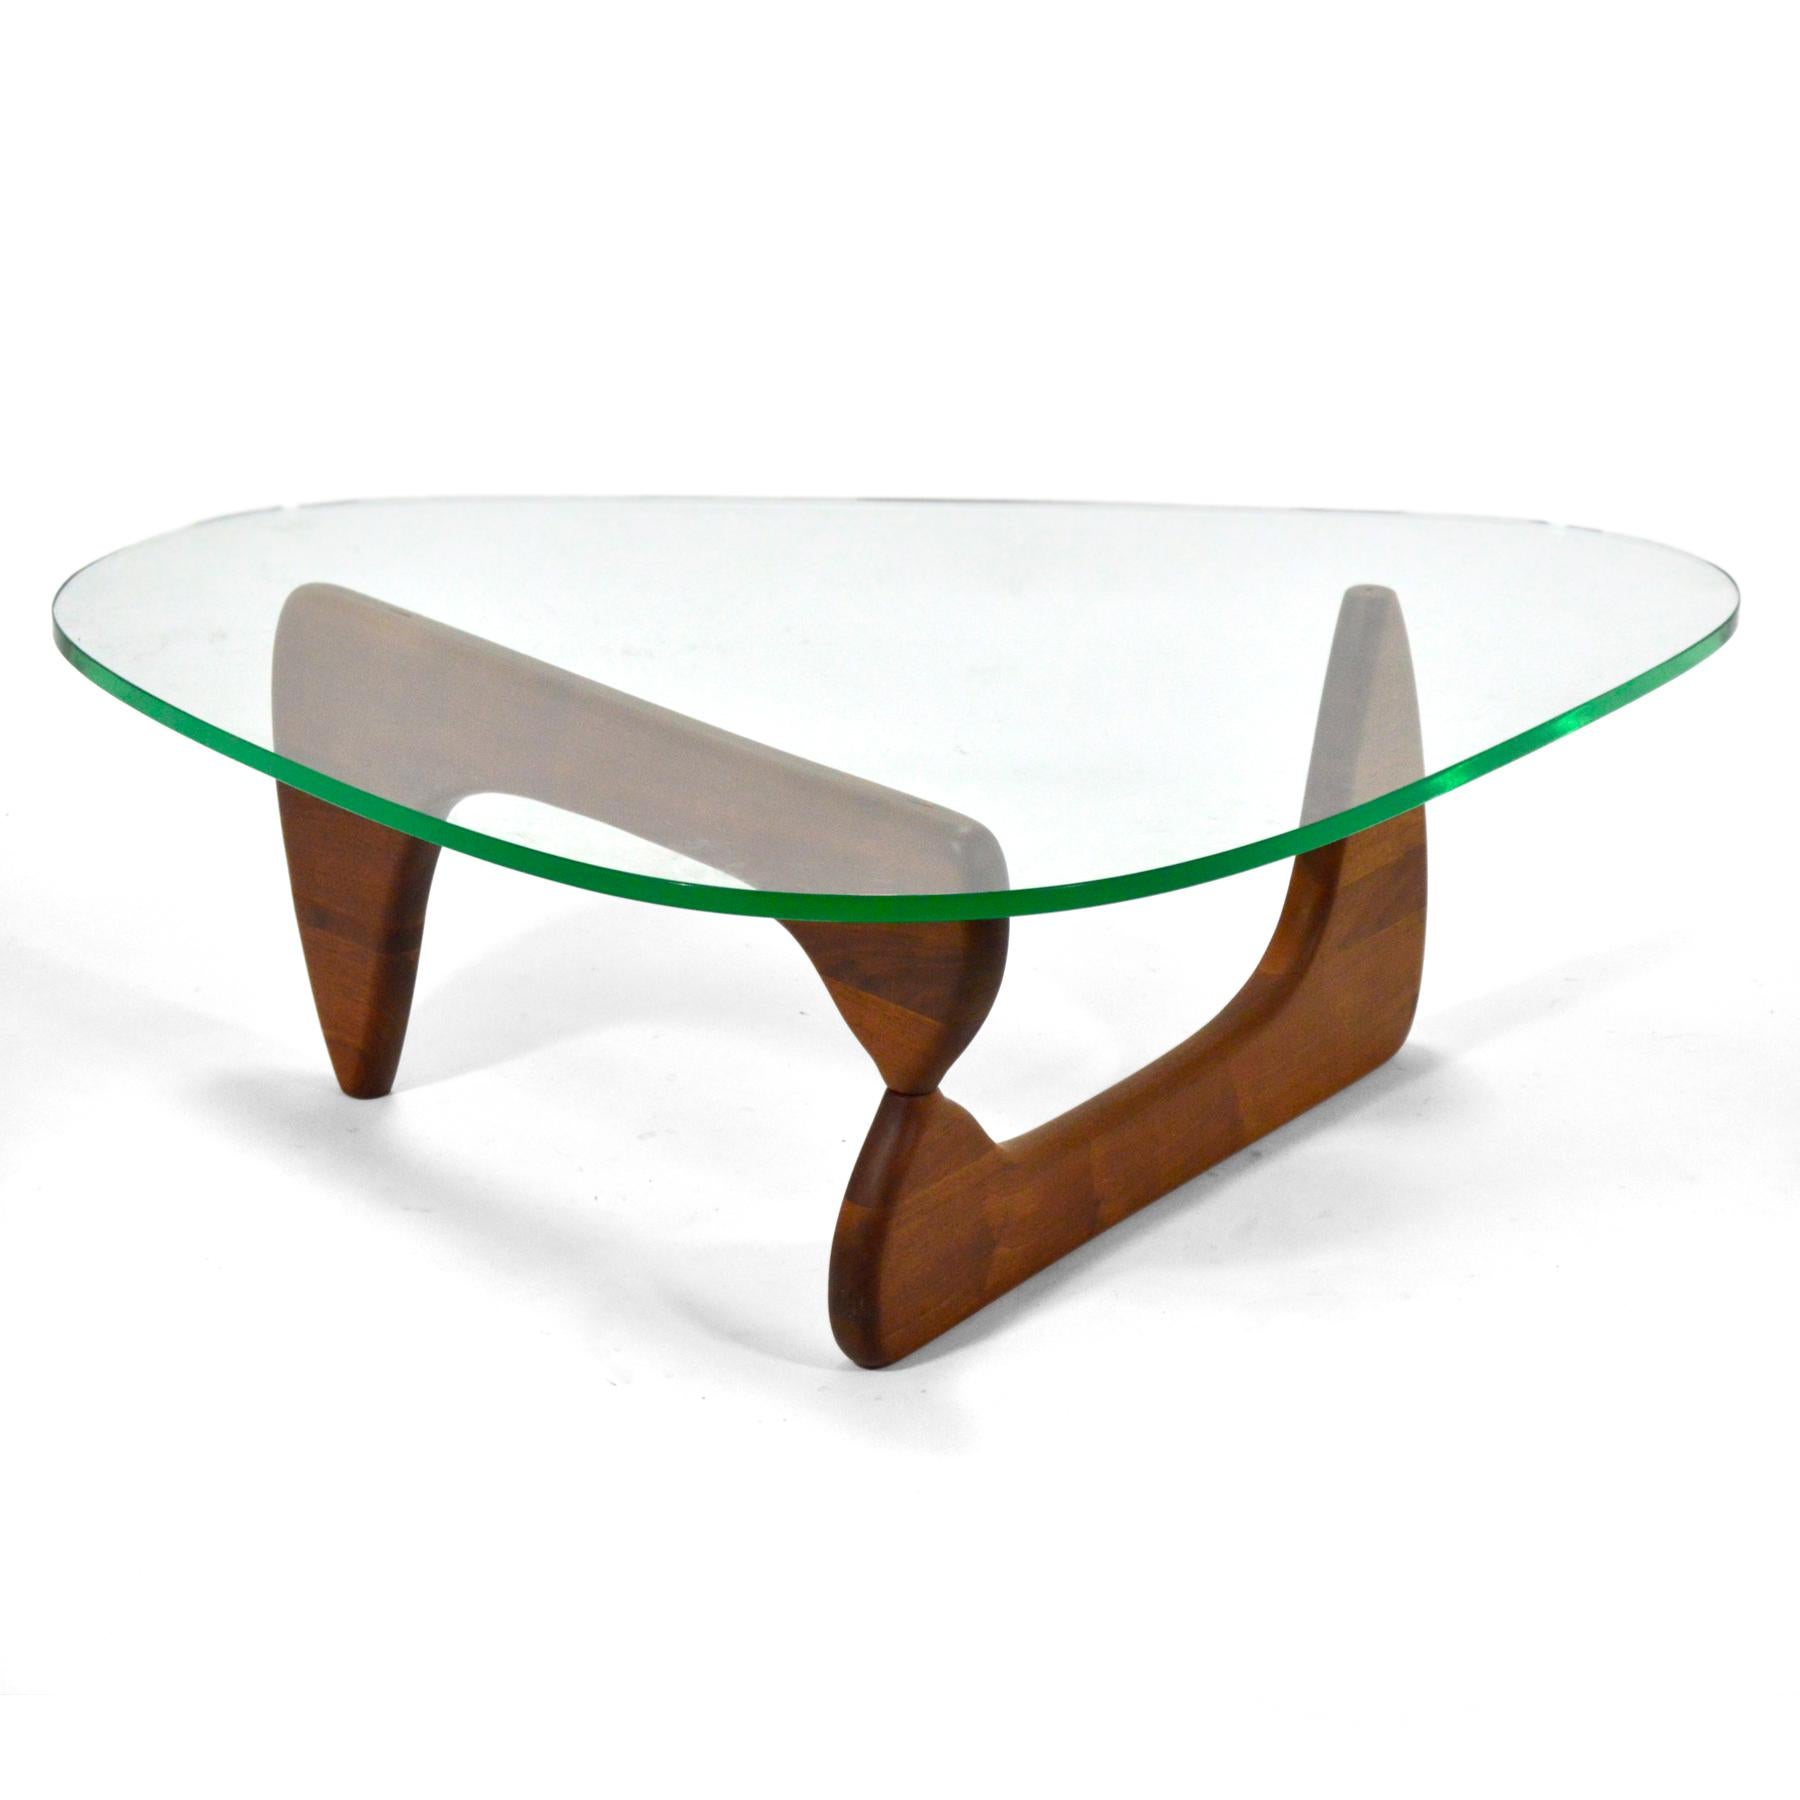 An exceptional early example of Noguchi's iconic functional sculpture, this table comes from the estate of a former Herman Miller executive. With a base of rich, oiled walnut and a glass top with the distinctive pale green edge, this very fine table